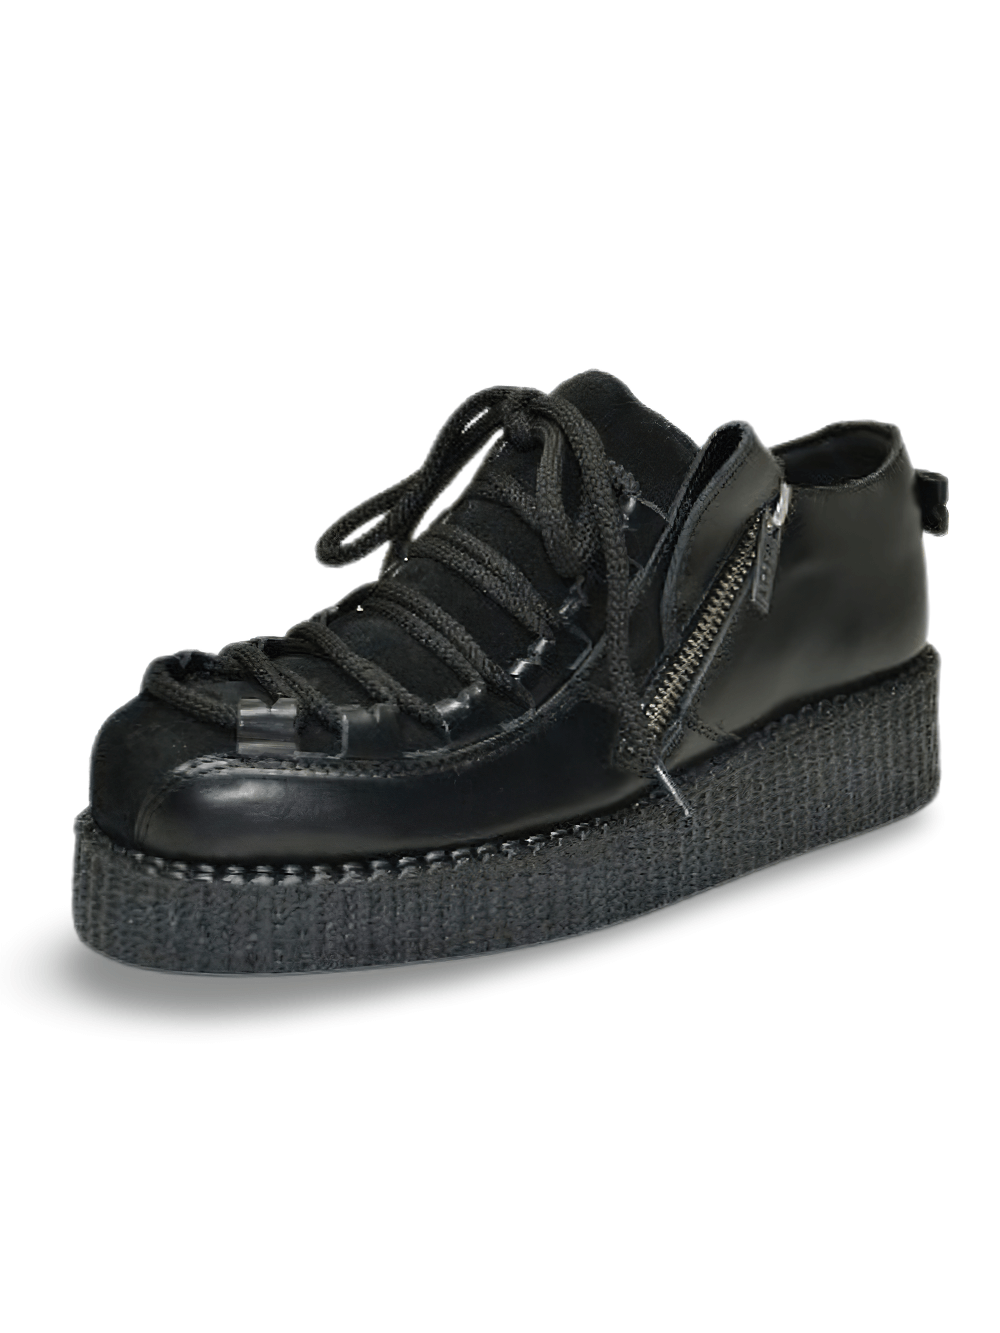 Unisex Black Leather Creepers With 3 cm Rubber Sole